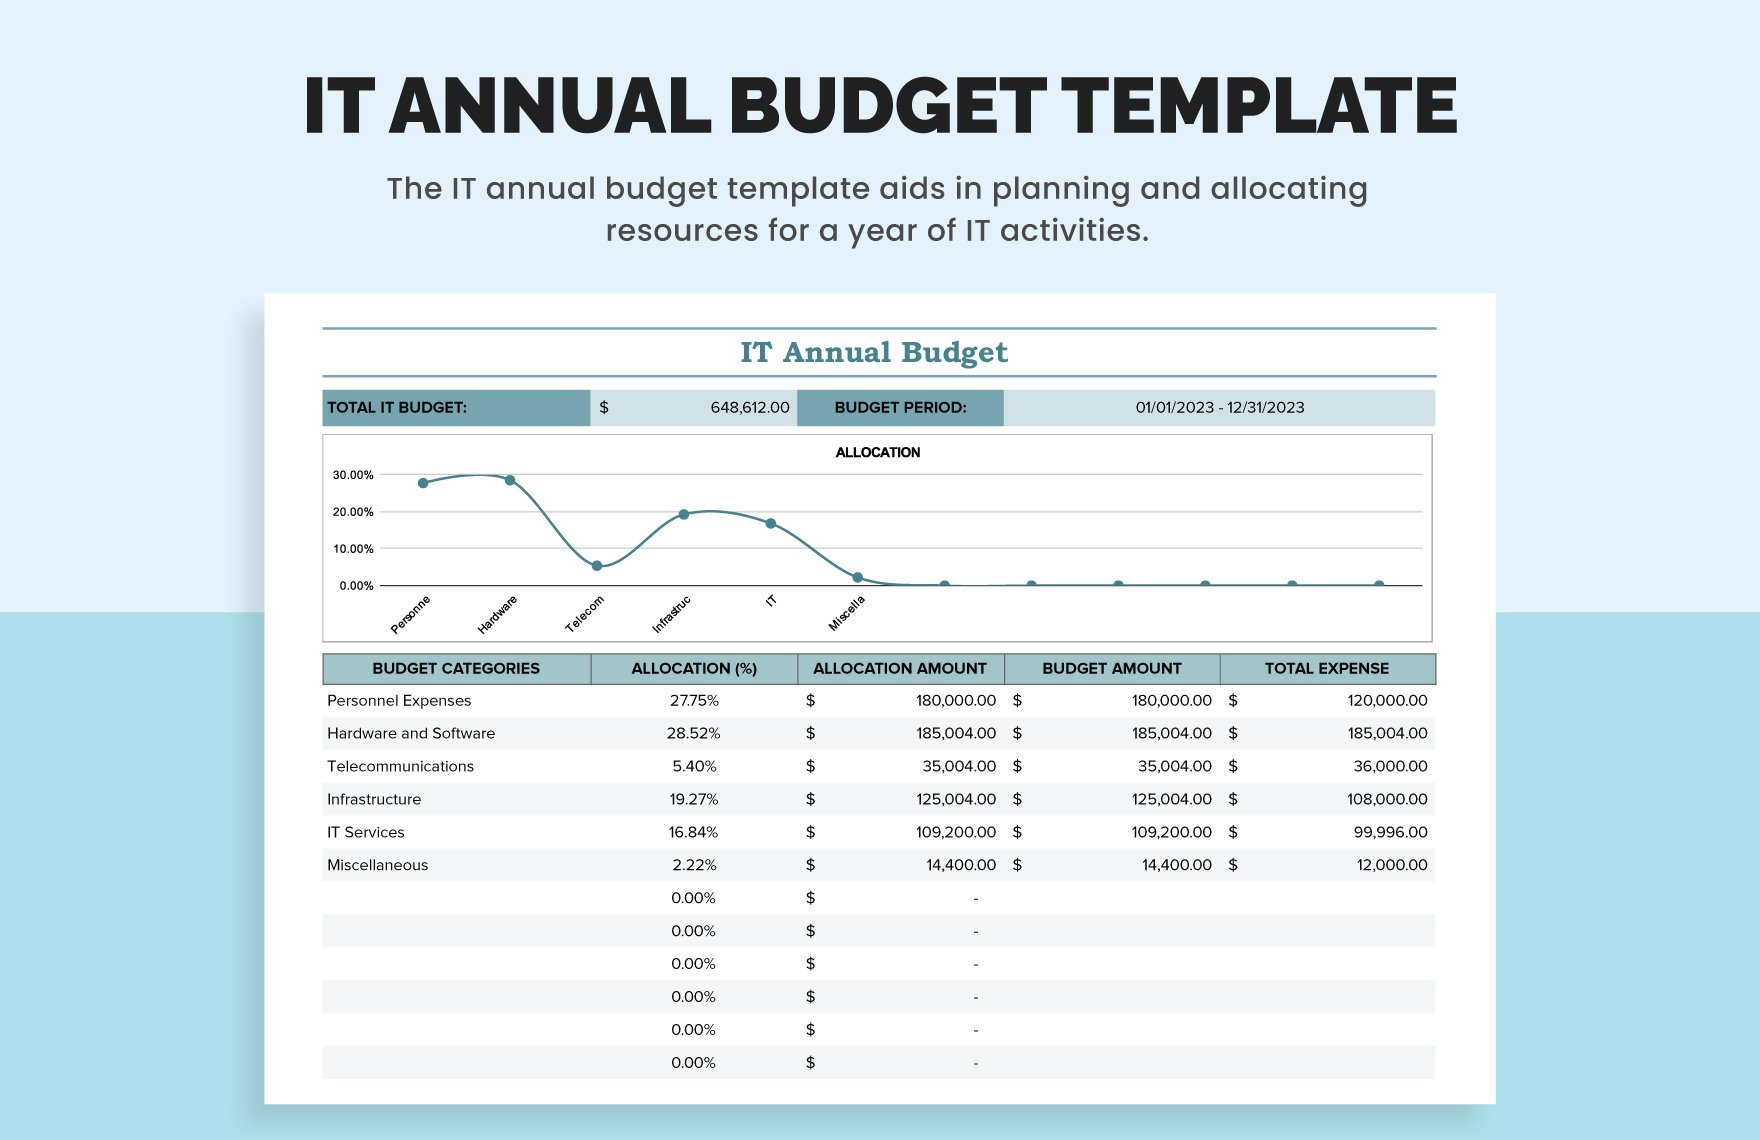 IT Annual Budget Template